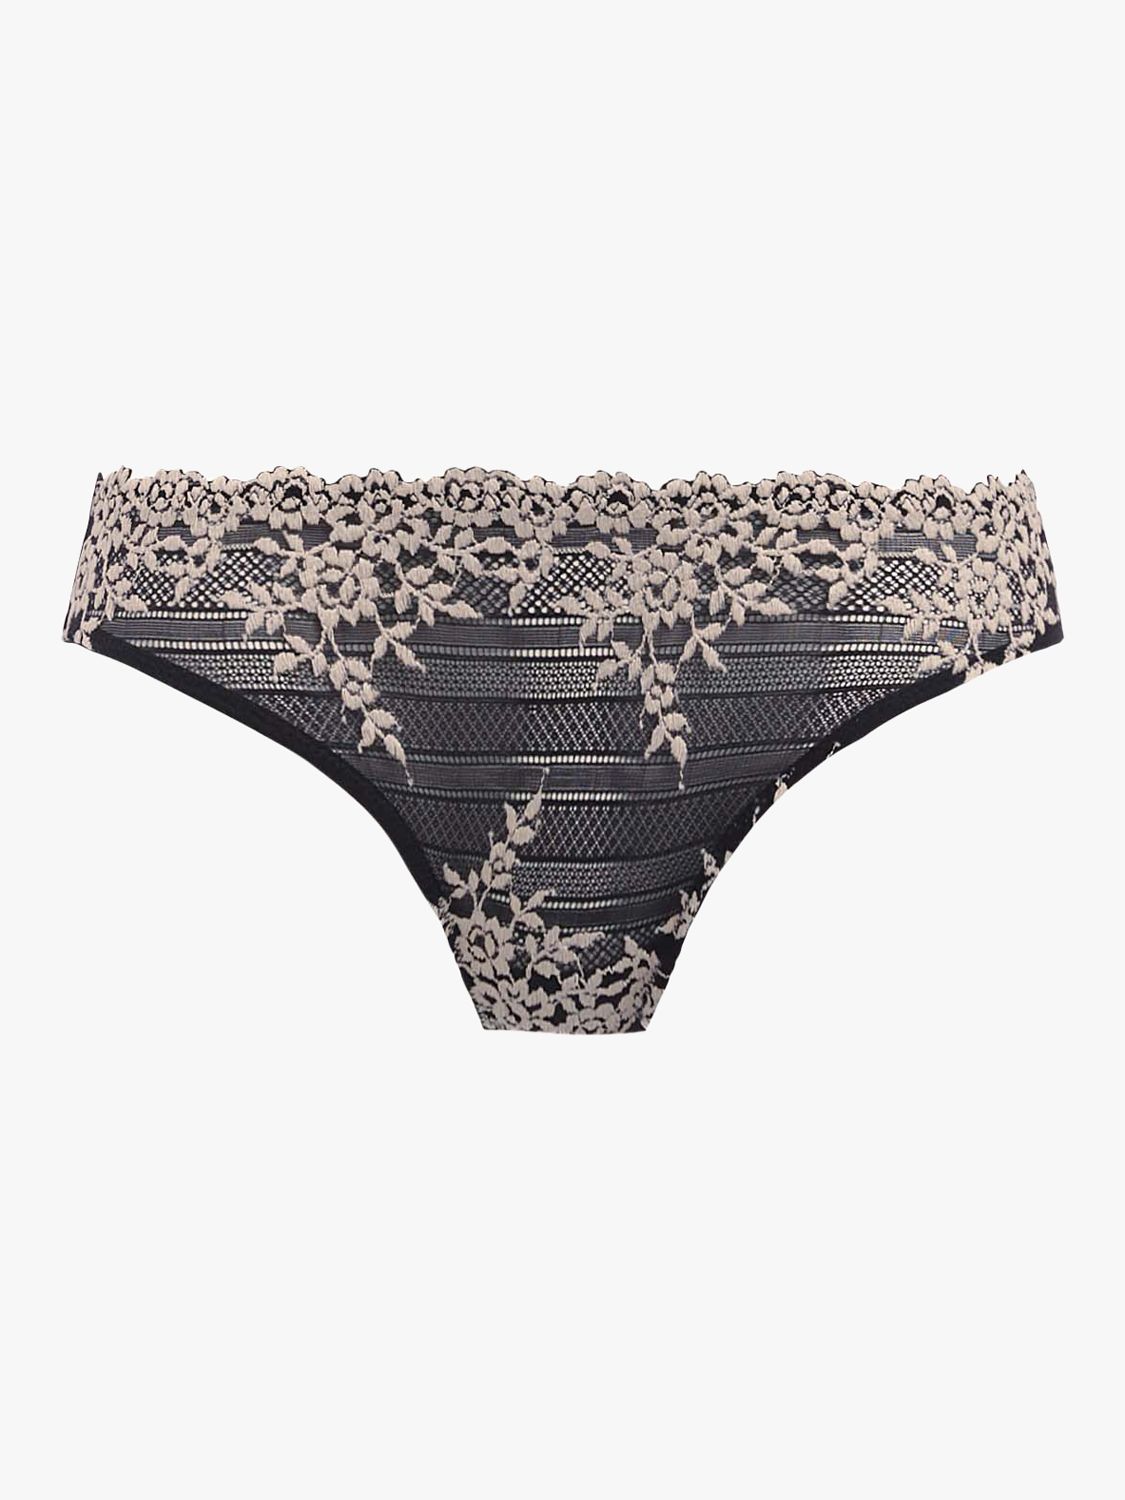 Buy Wacoal Embrace Lace Knickers Online at johnlewis.com